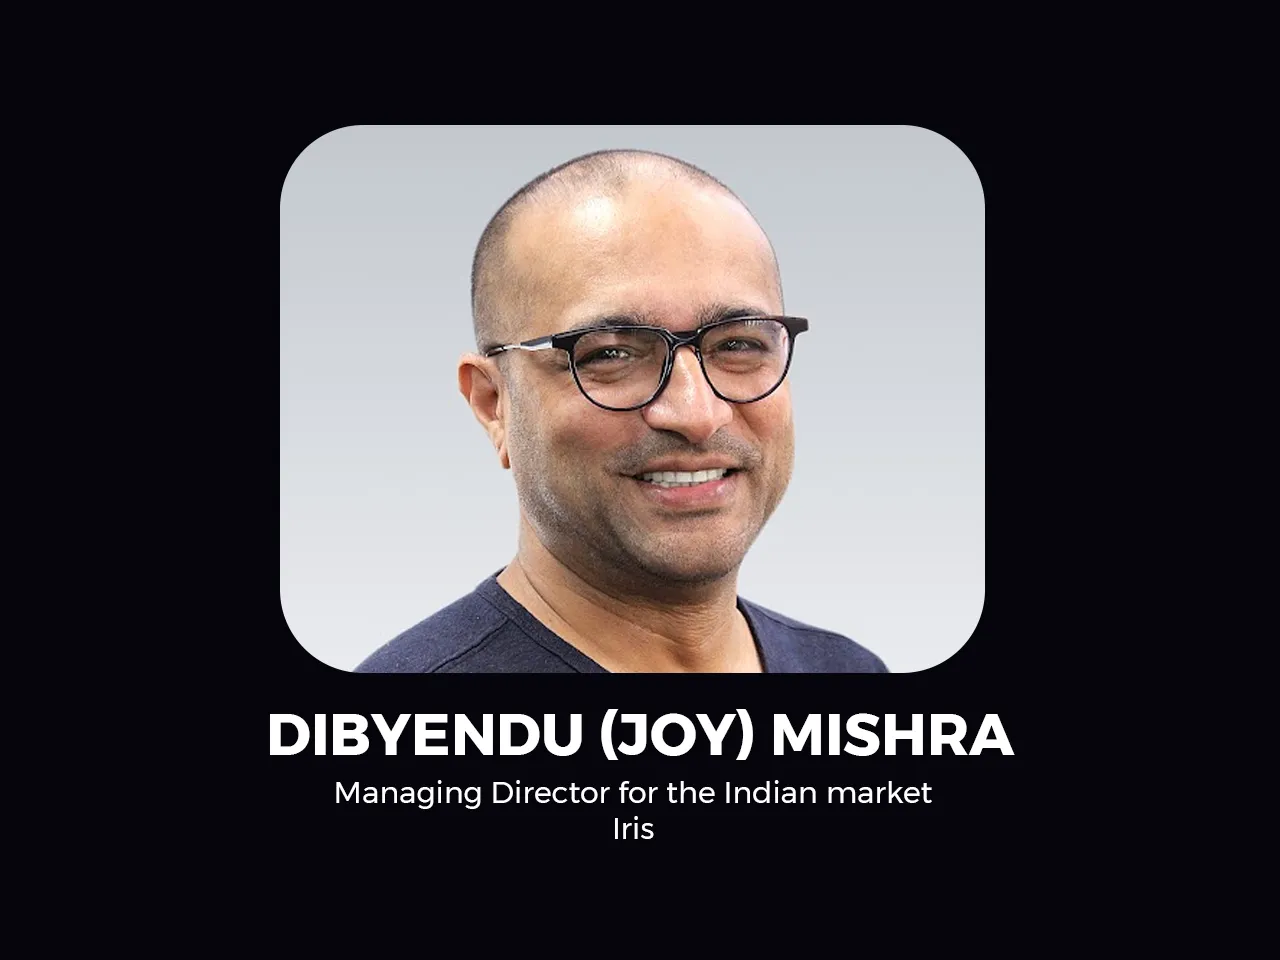 Iris appoints Dibyendu (Joy) Mishra as the Managing Director for the Indian market